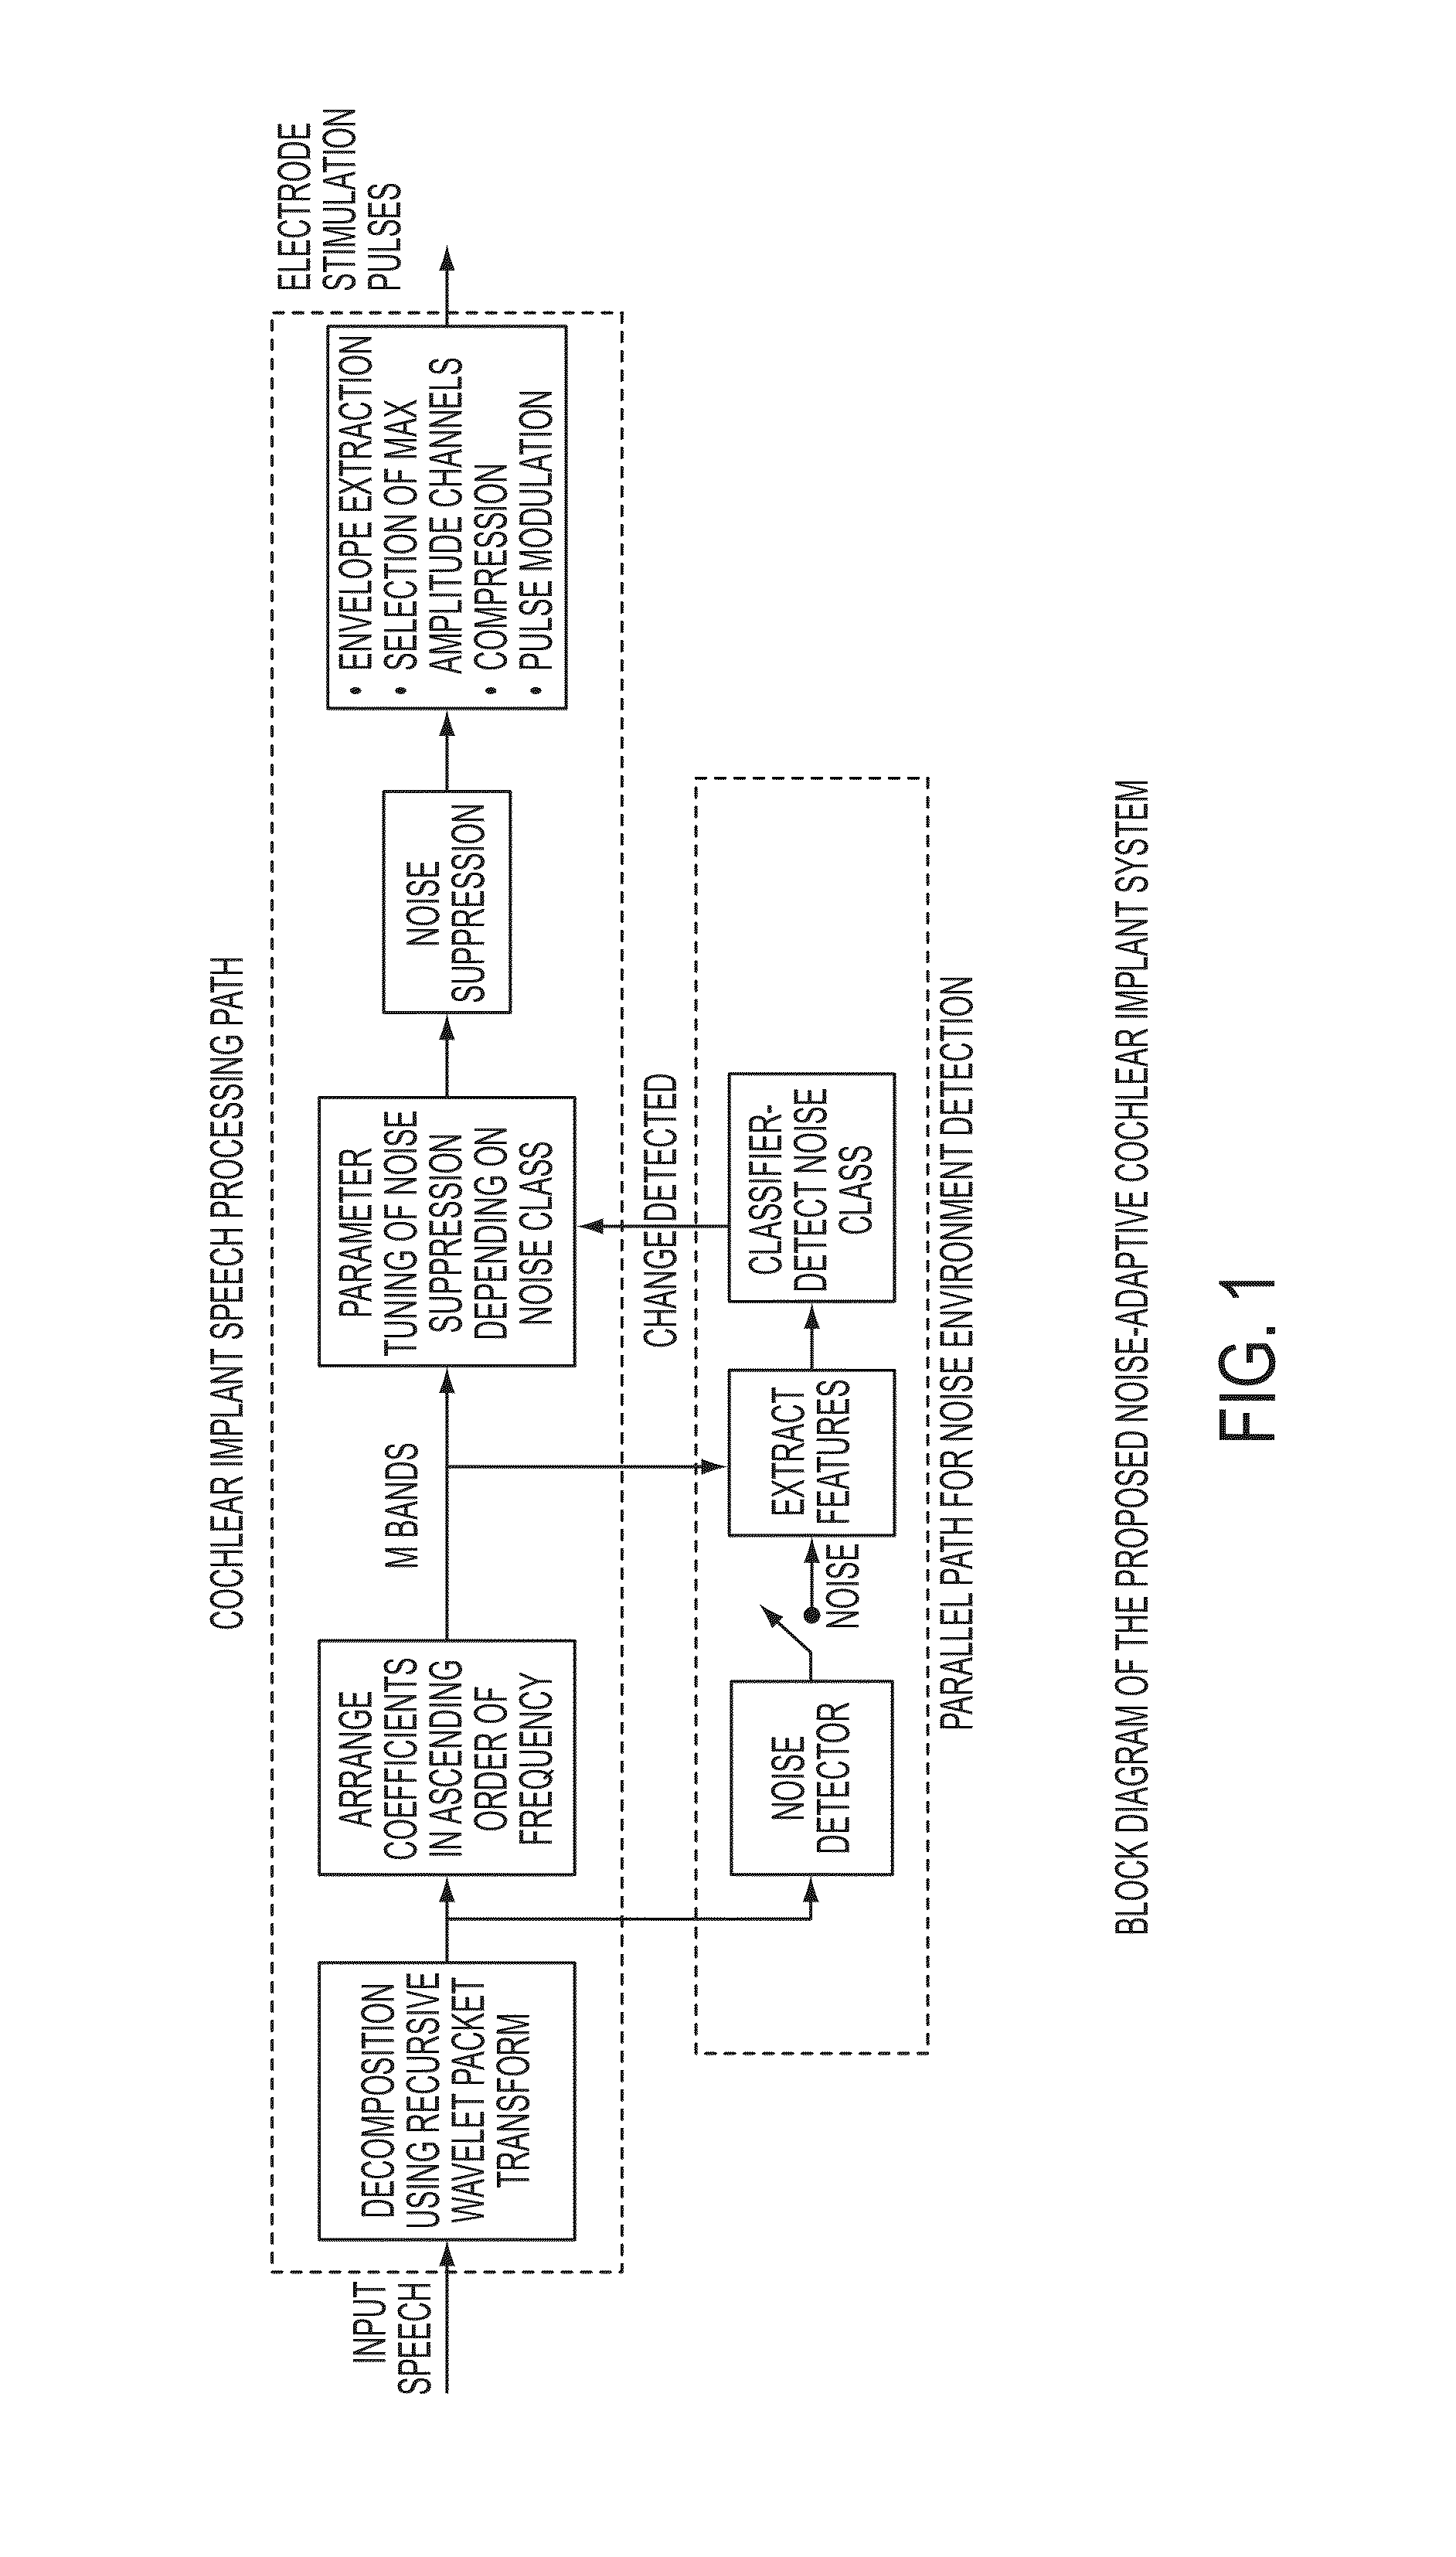 Automated method of classifying and suppressing noise in hearing devices